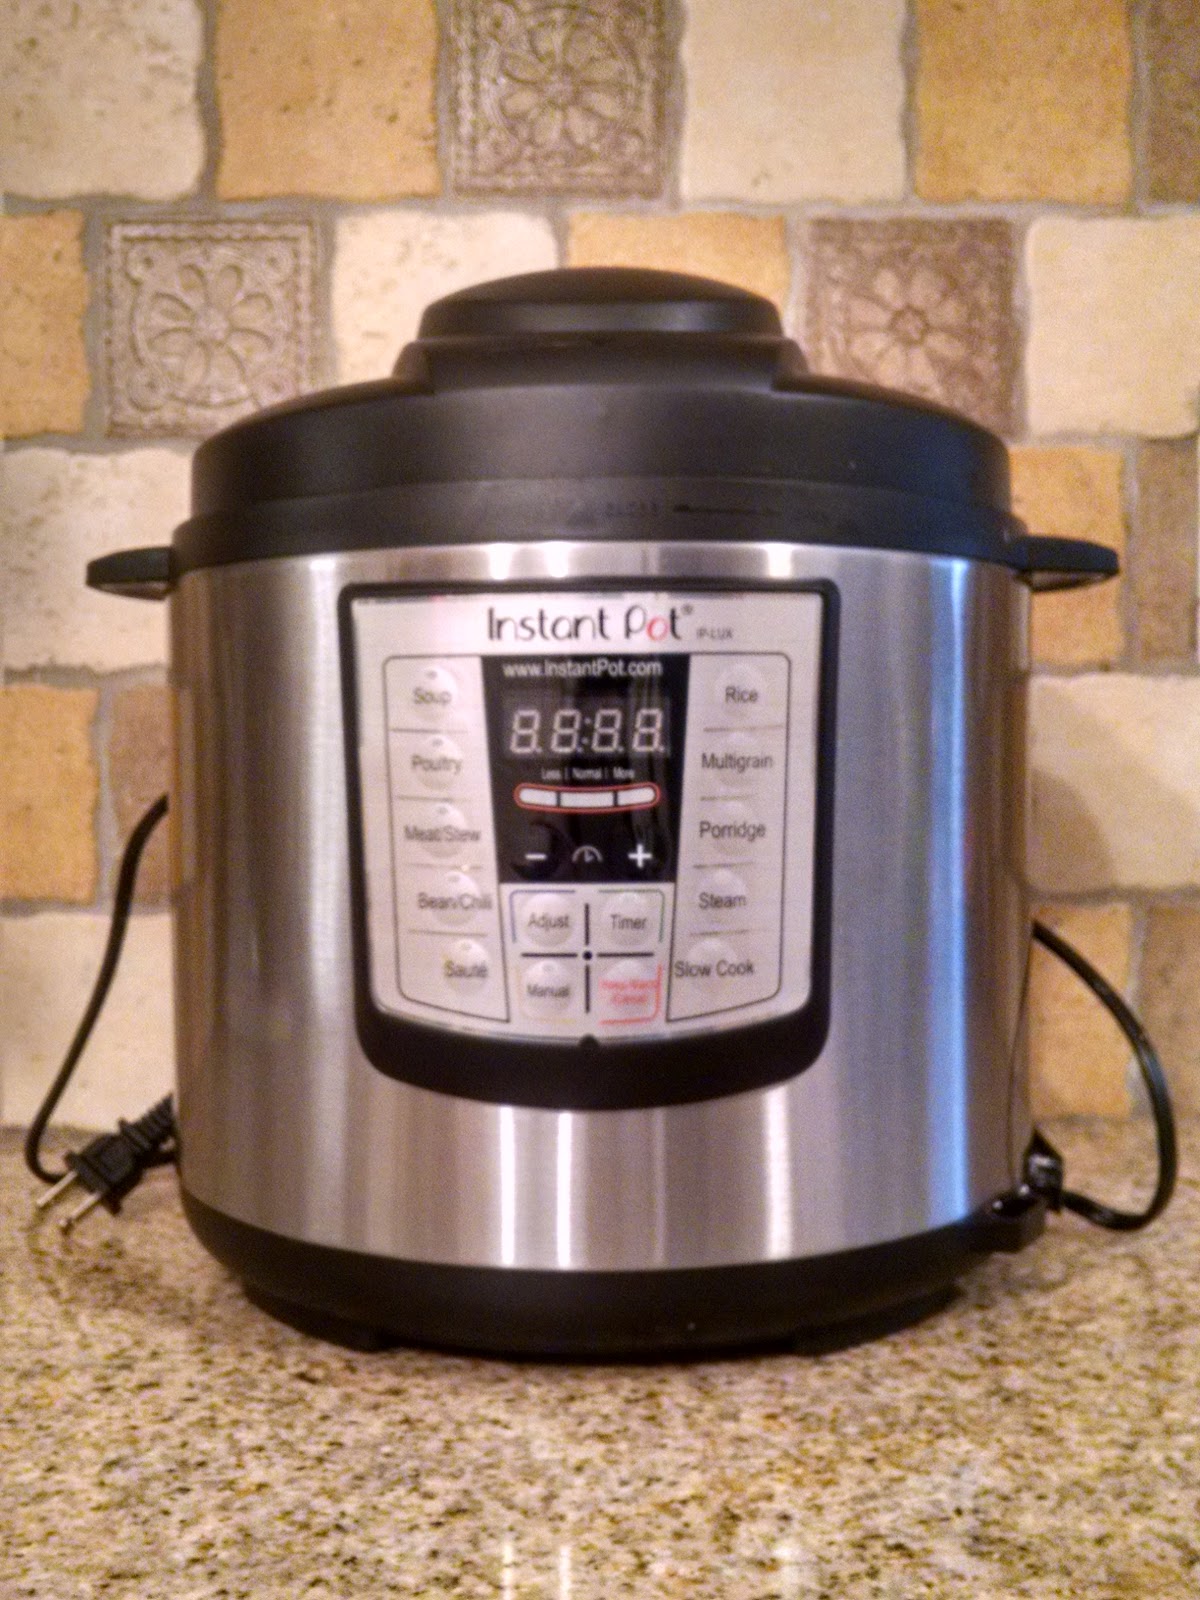 Must Run in the Family: Amazing Things You Can Do With an Instant Pot